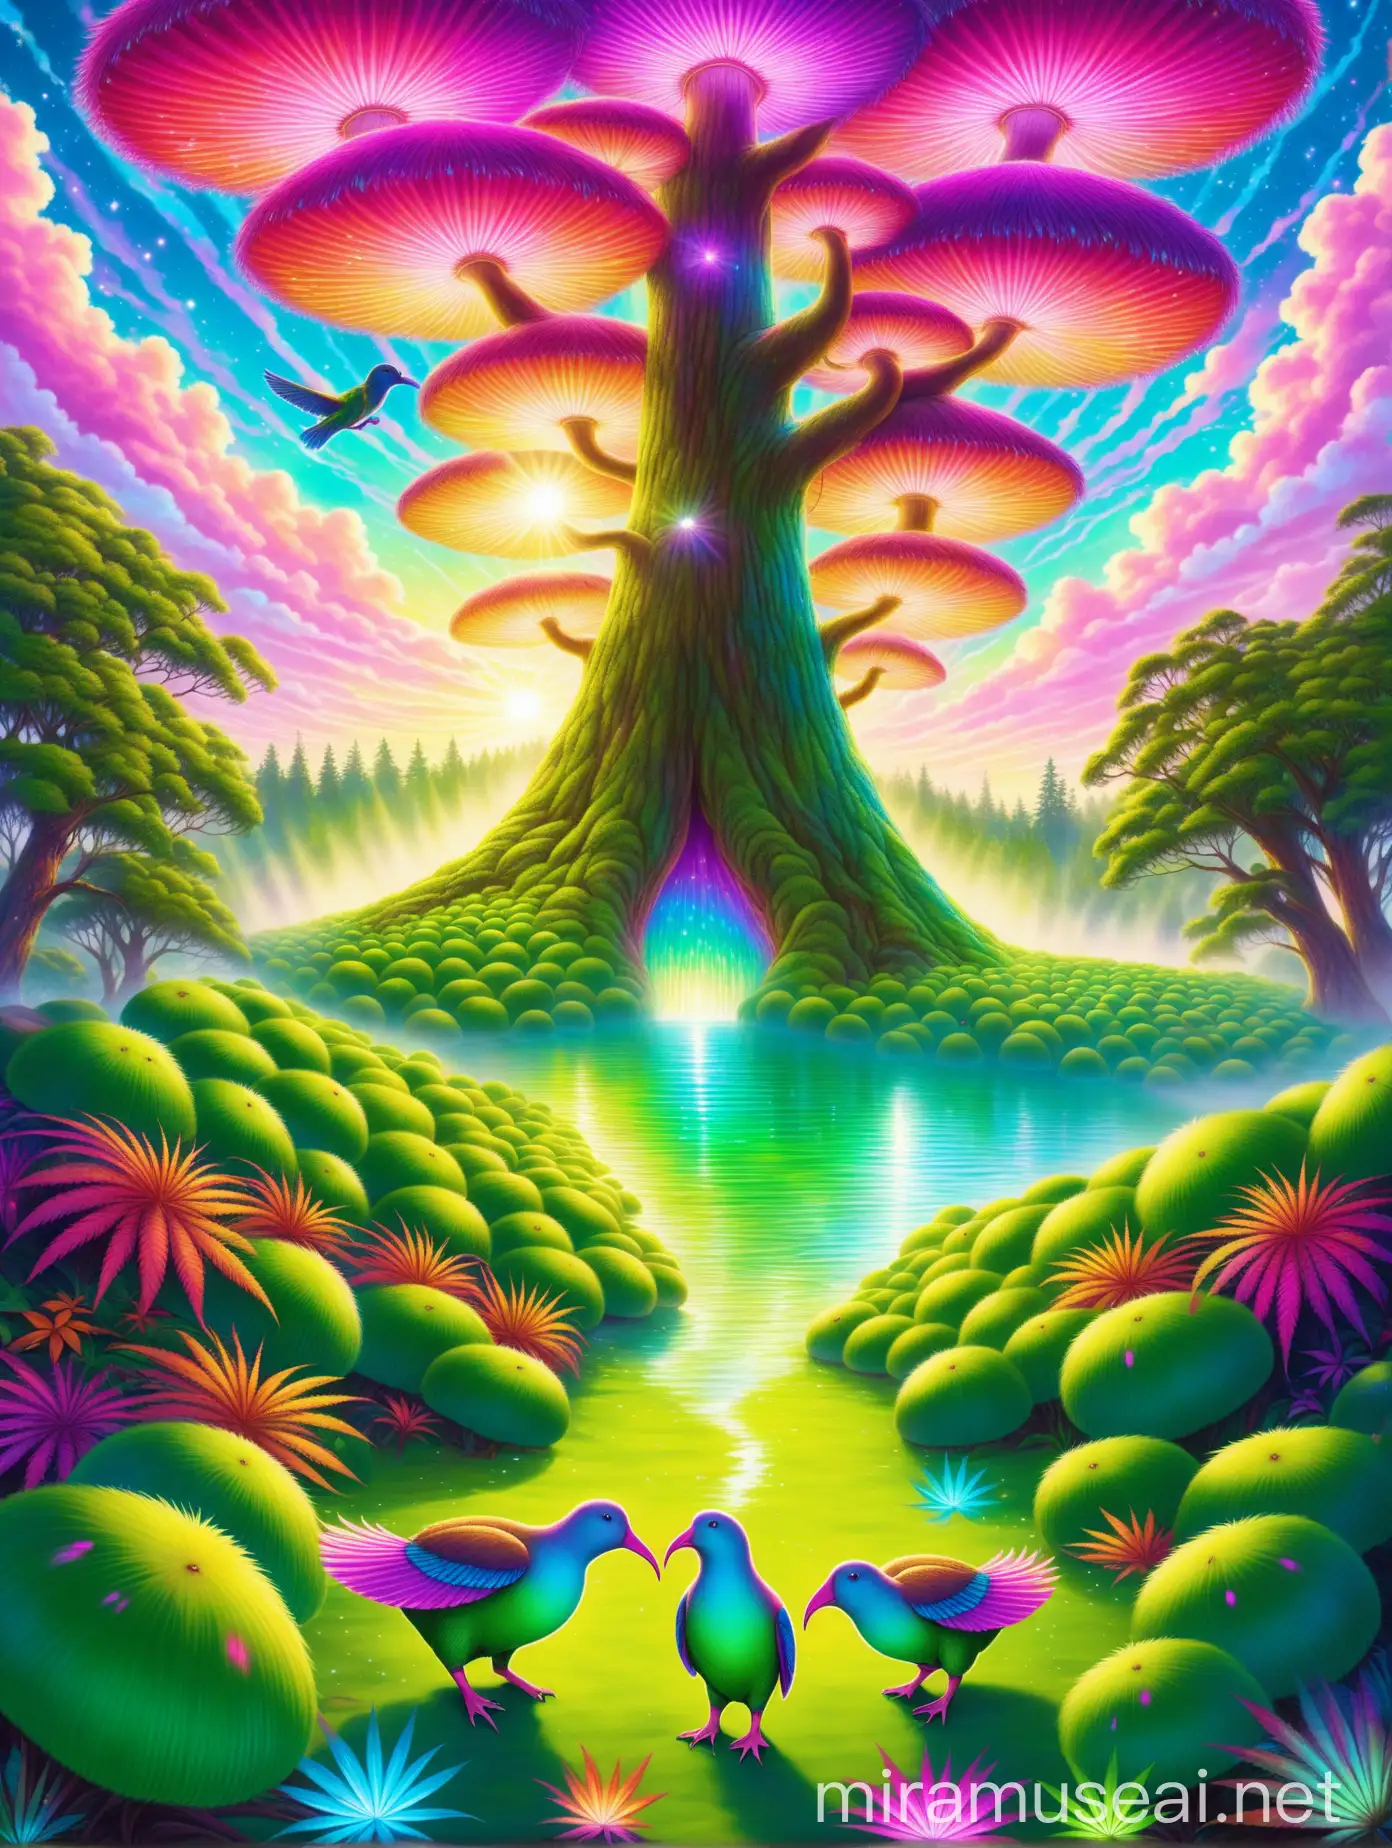 An enchanted forest in New Zealand, colourful kiwi birds with fur of pink and light green, , and fluffy platypusses, and giant trees, in great detail please. Realistic, early morning, A Psychedelic exotic female goddess in a field of cannabis, trippy, vibrant colors, sunshine, water, trees, cool clouds